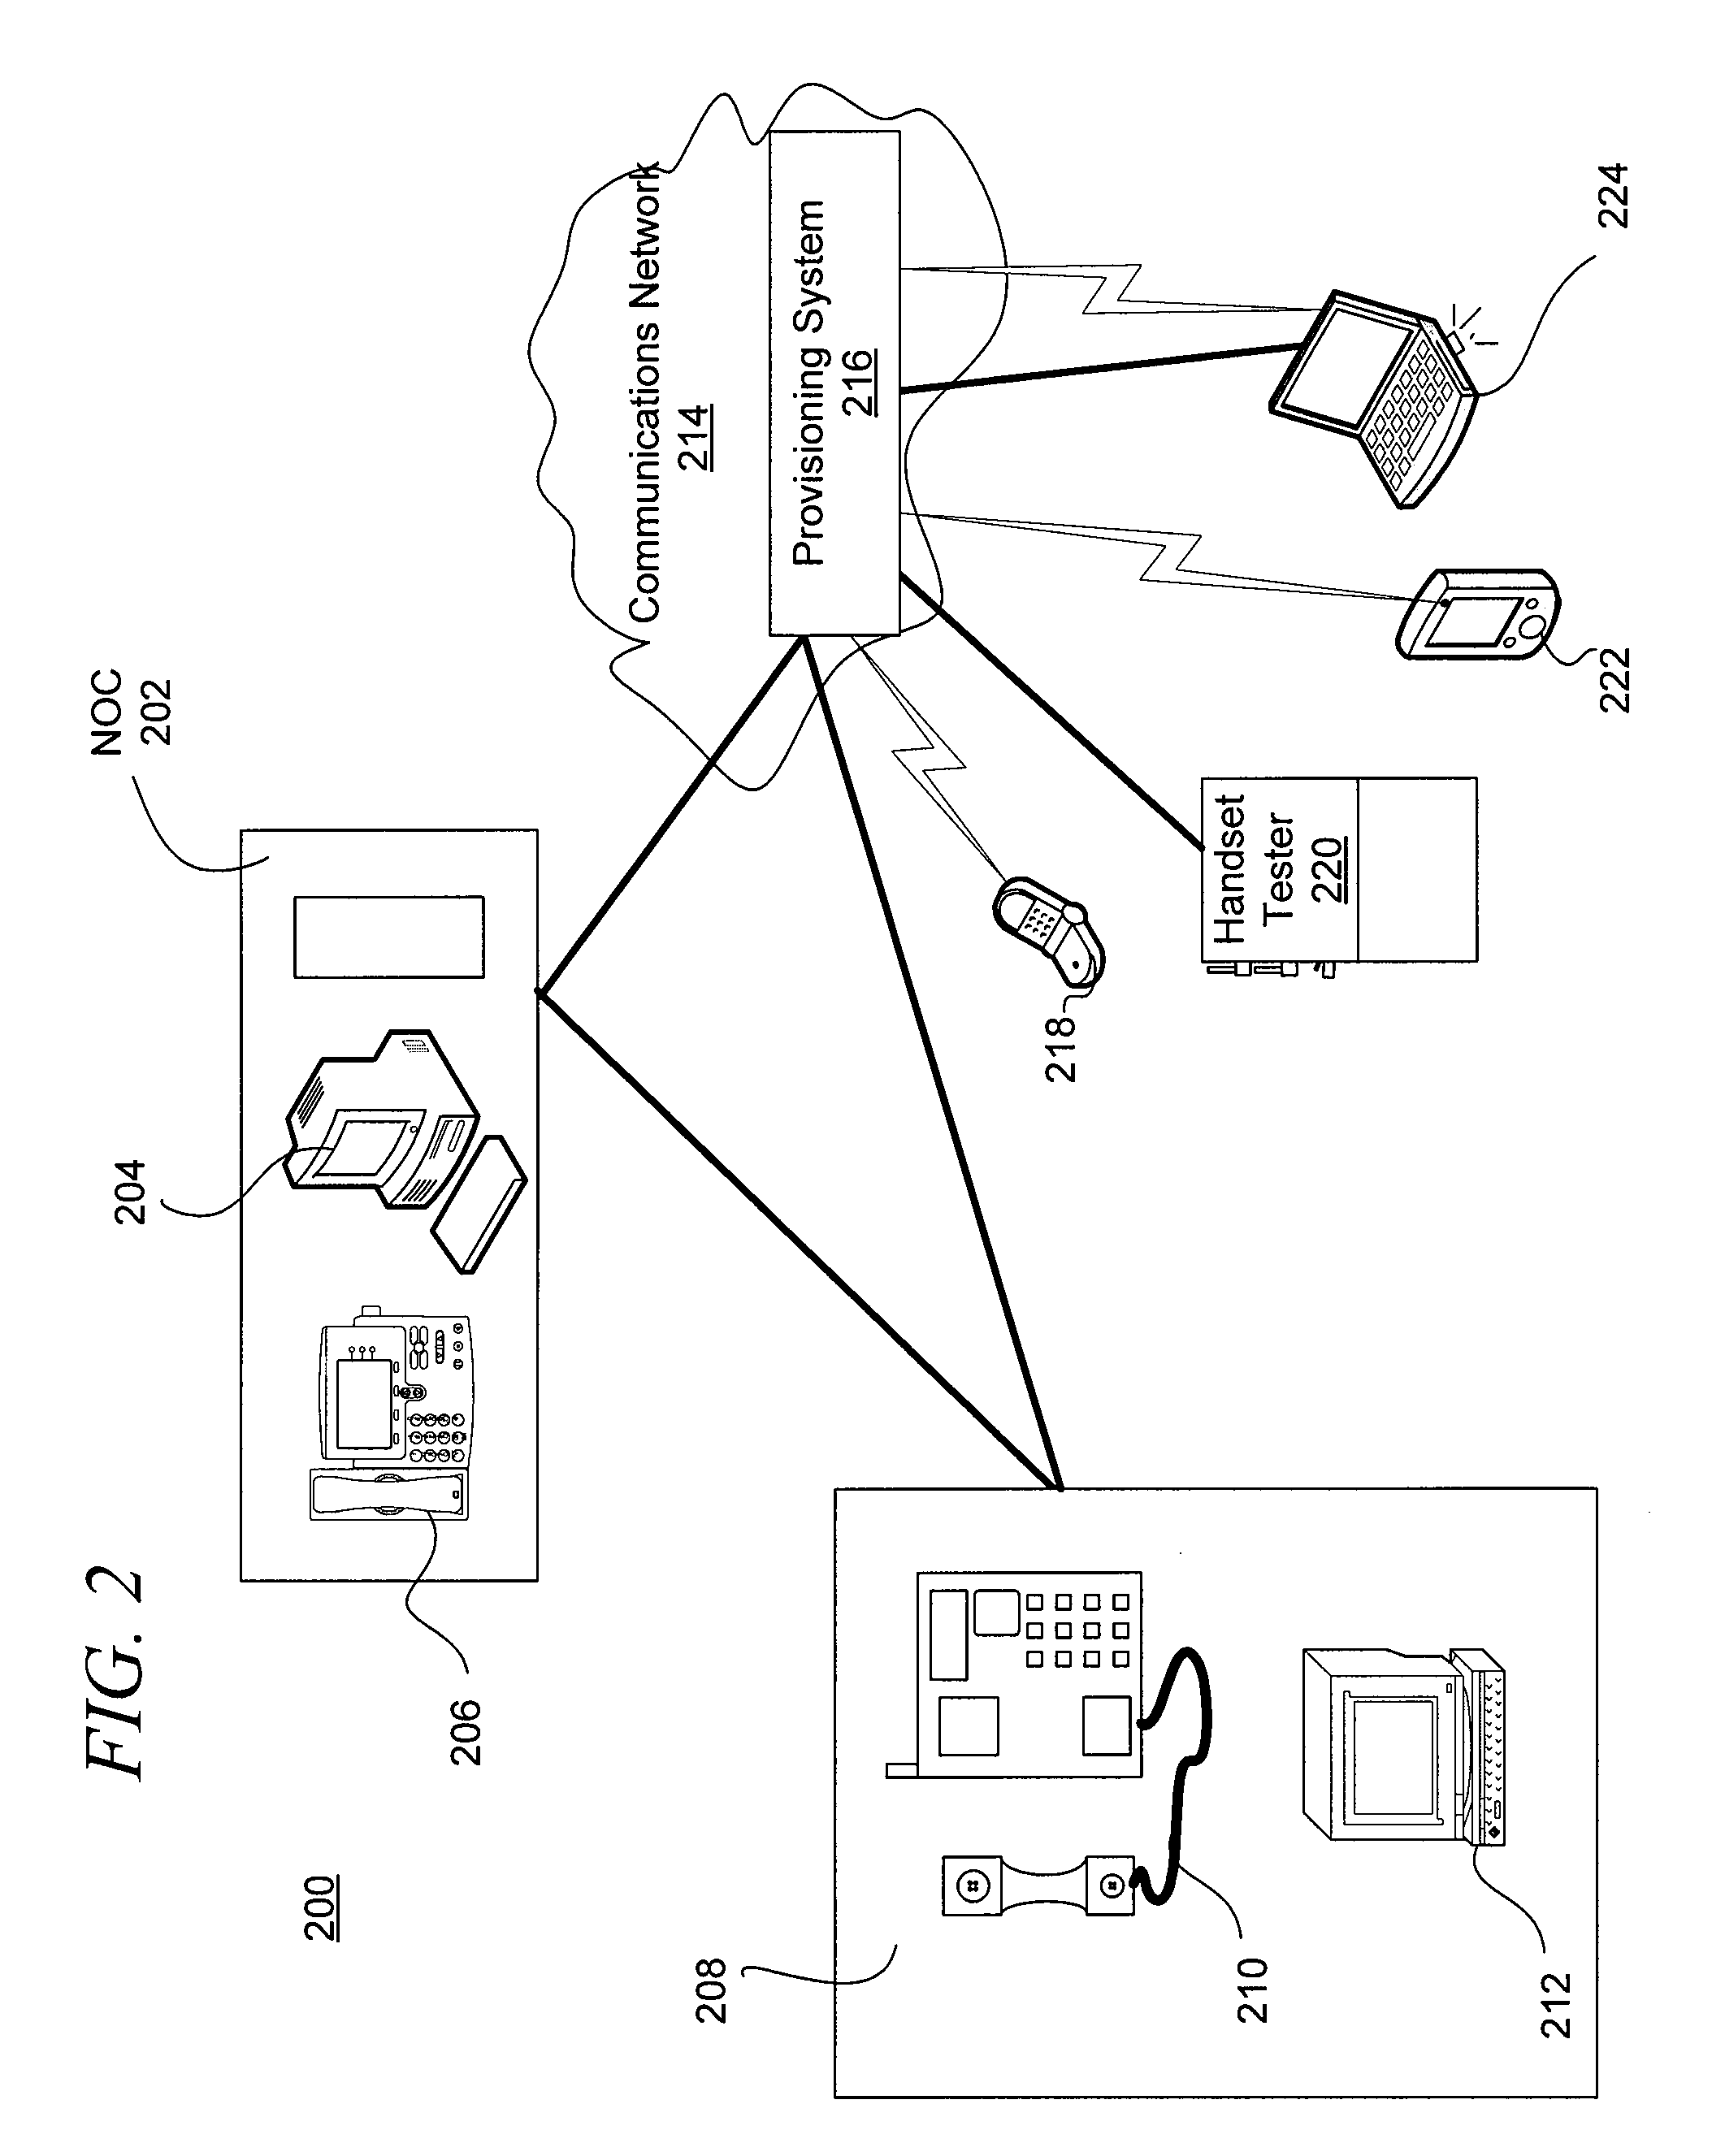 System and method for voice activated provisioning of telecommunication services